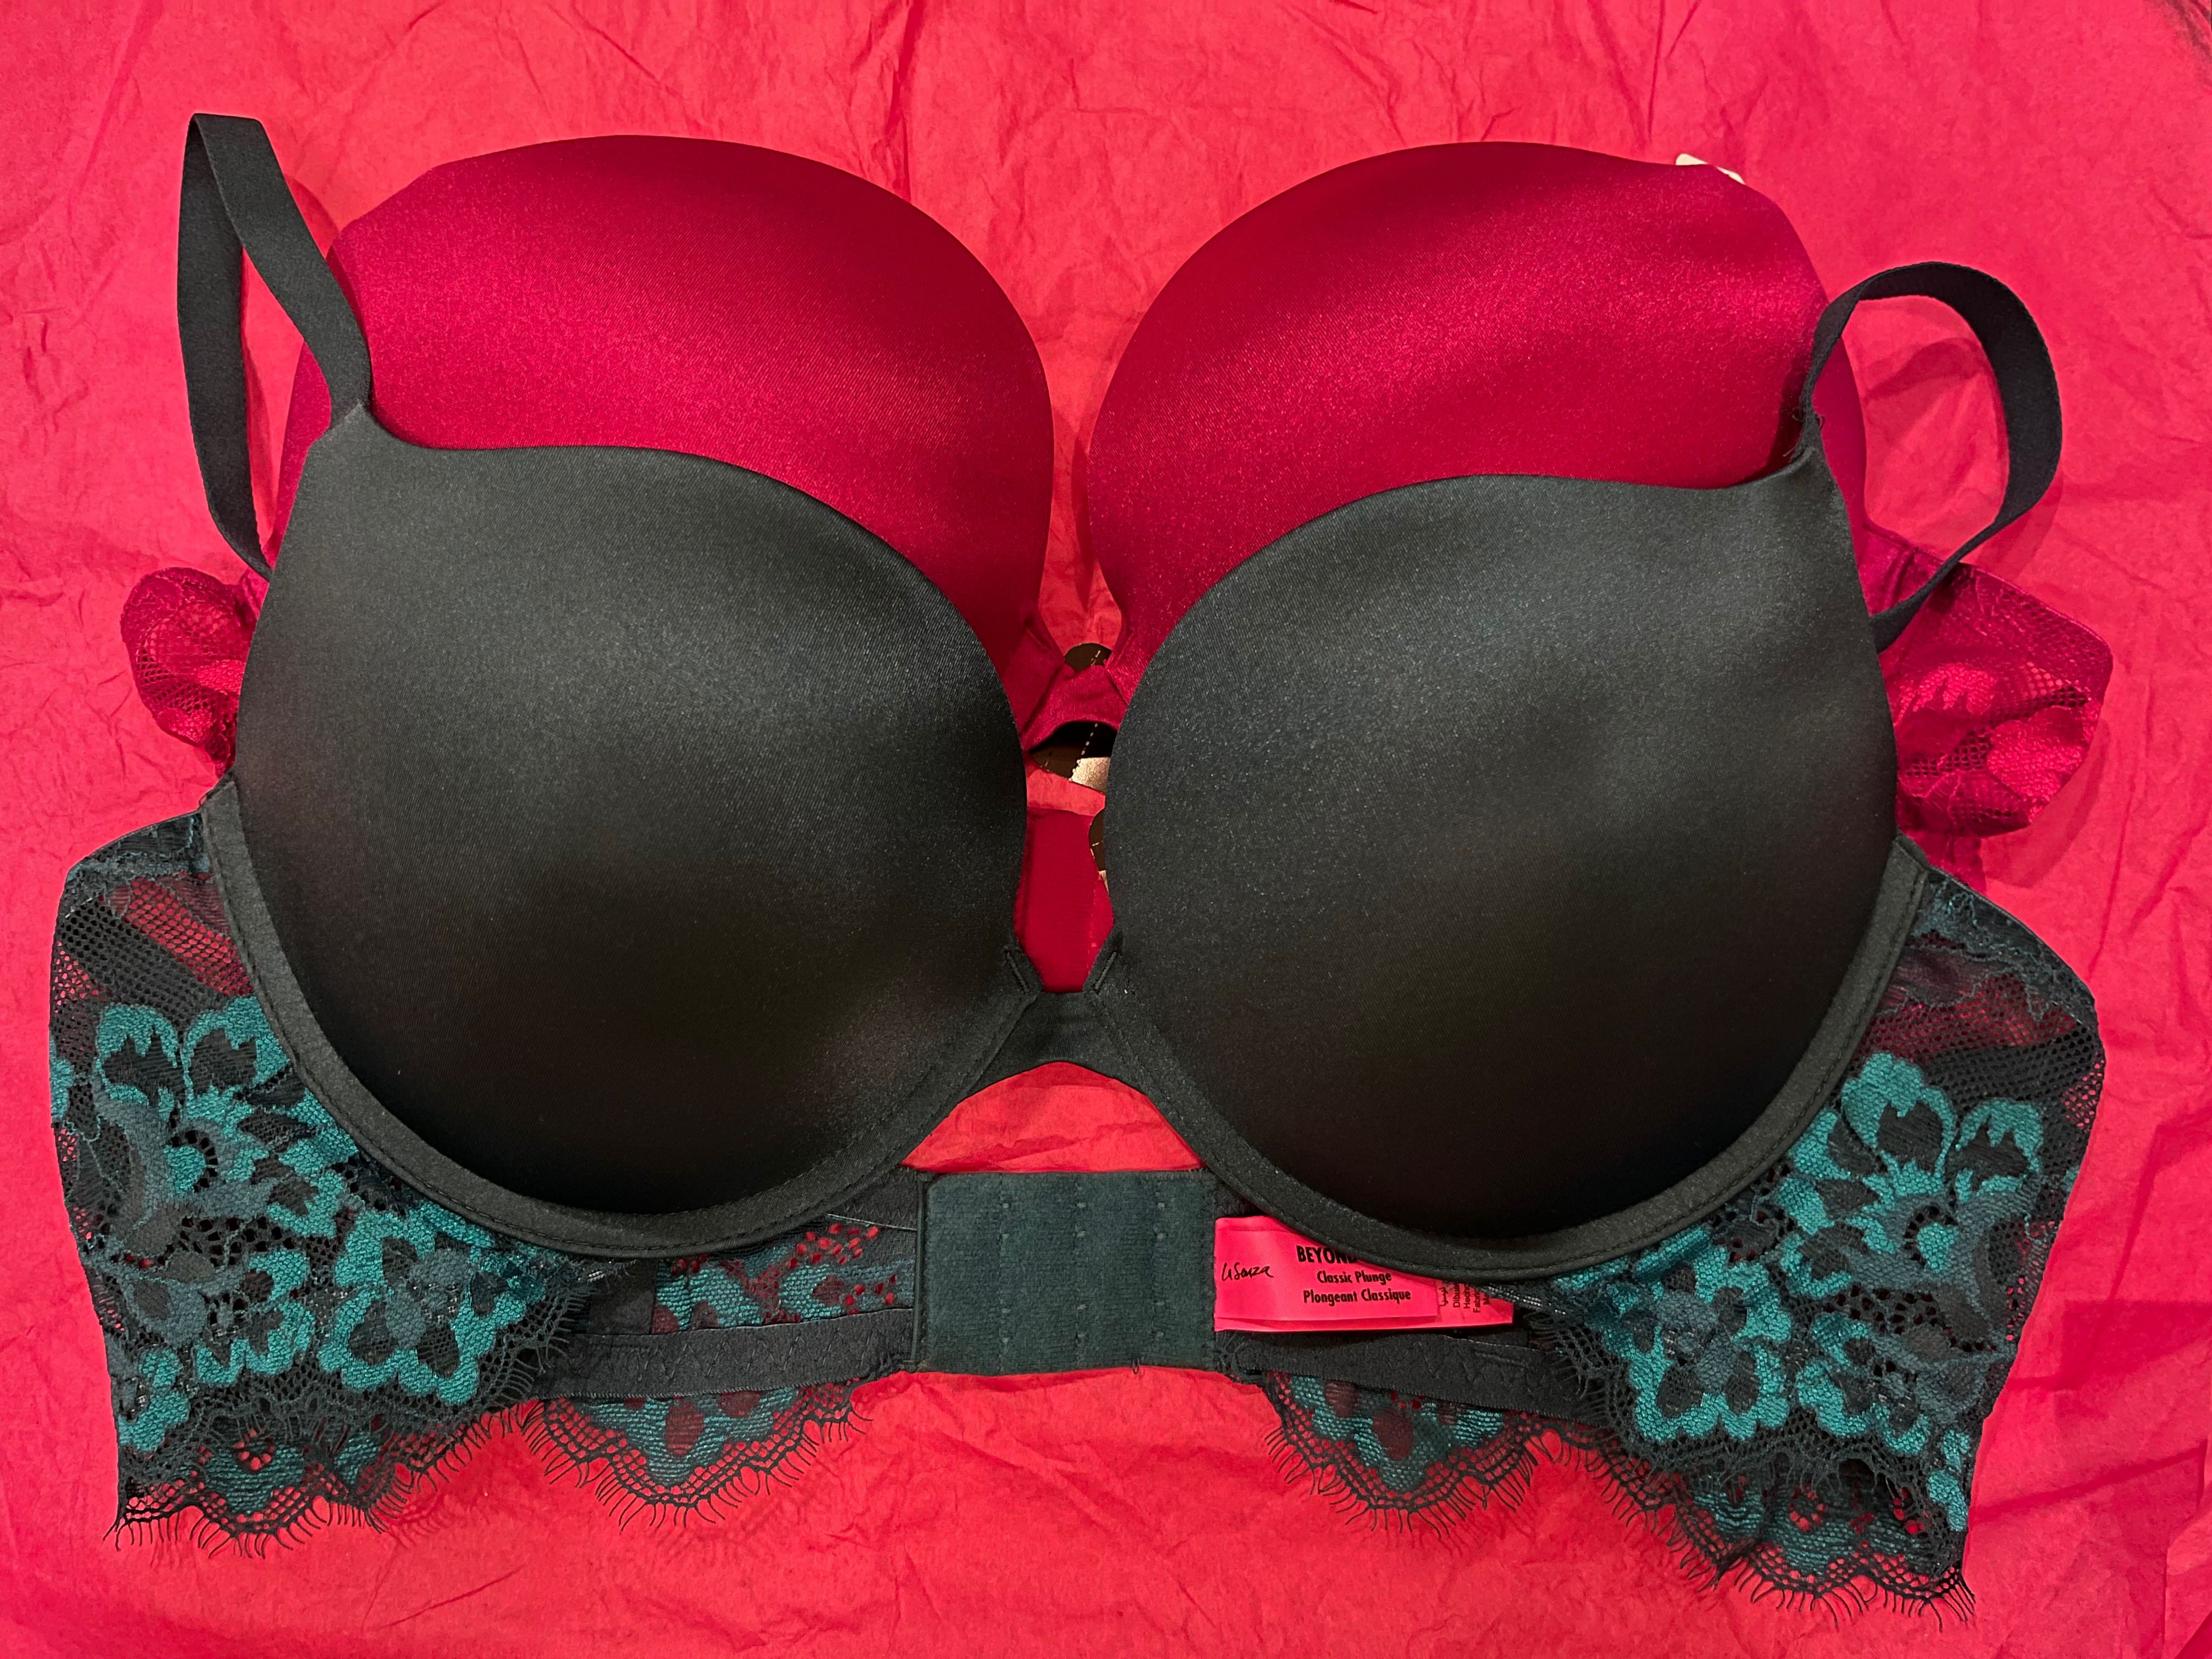 La Senza Beyond Sexy Ultimate Plunge Black and Gold Lace Bra Size undefined  - $36 - From Lou